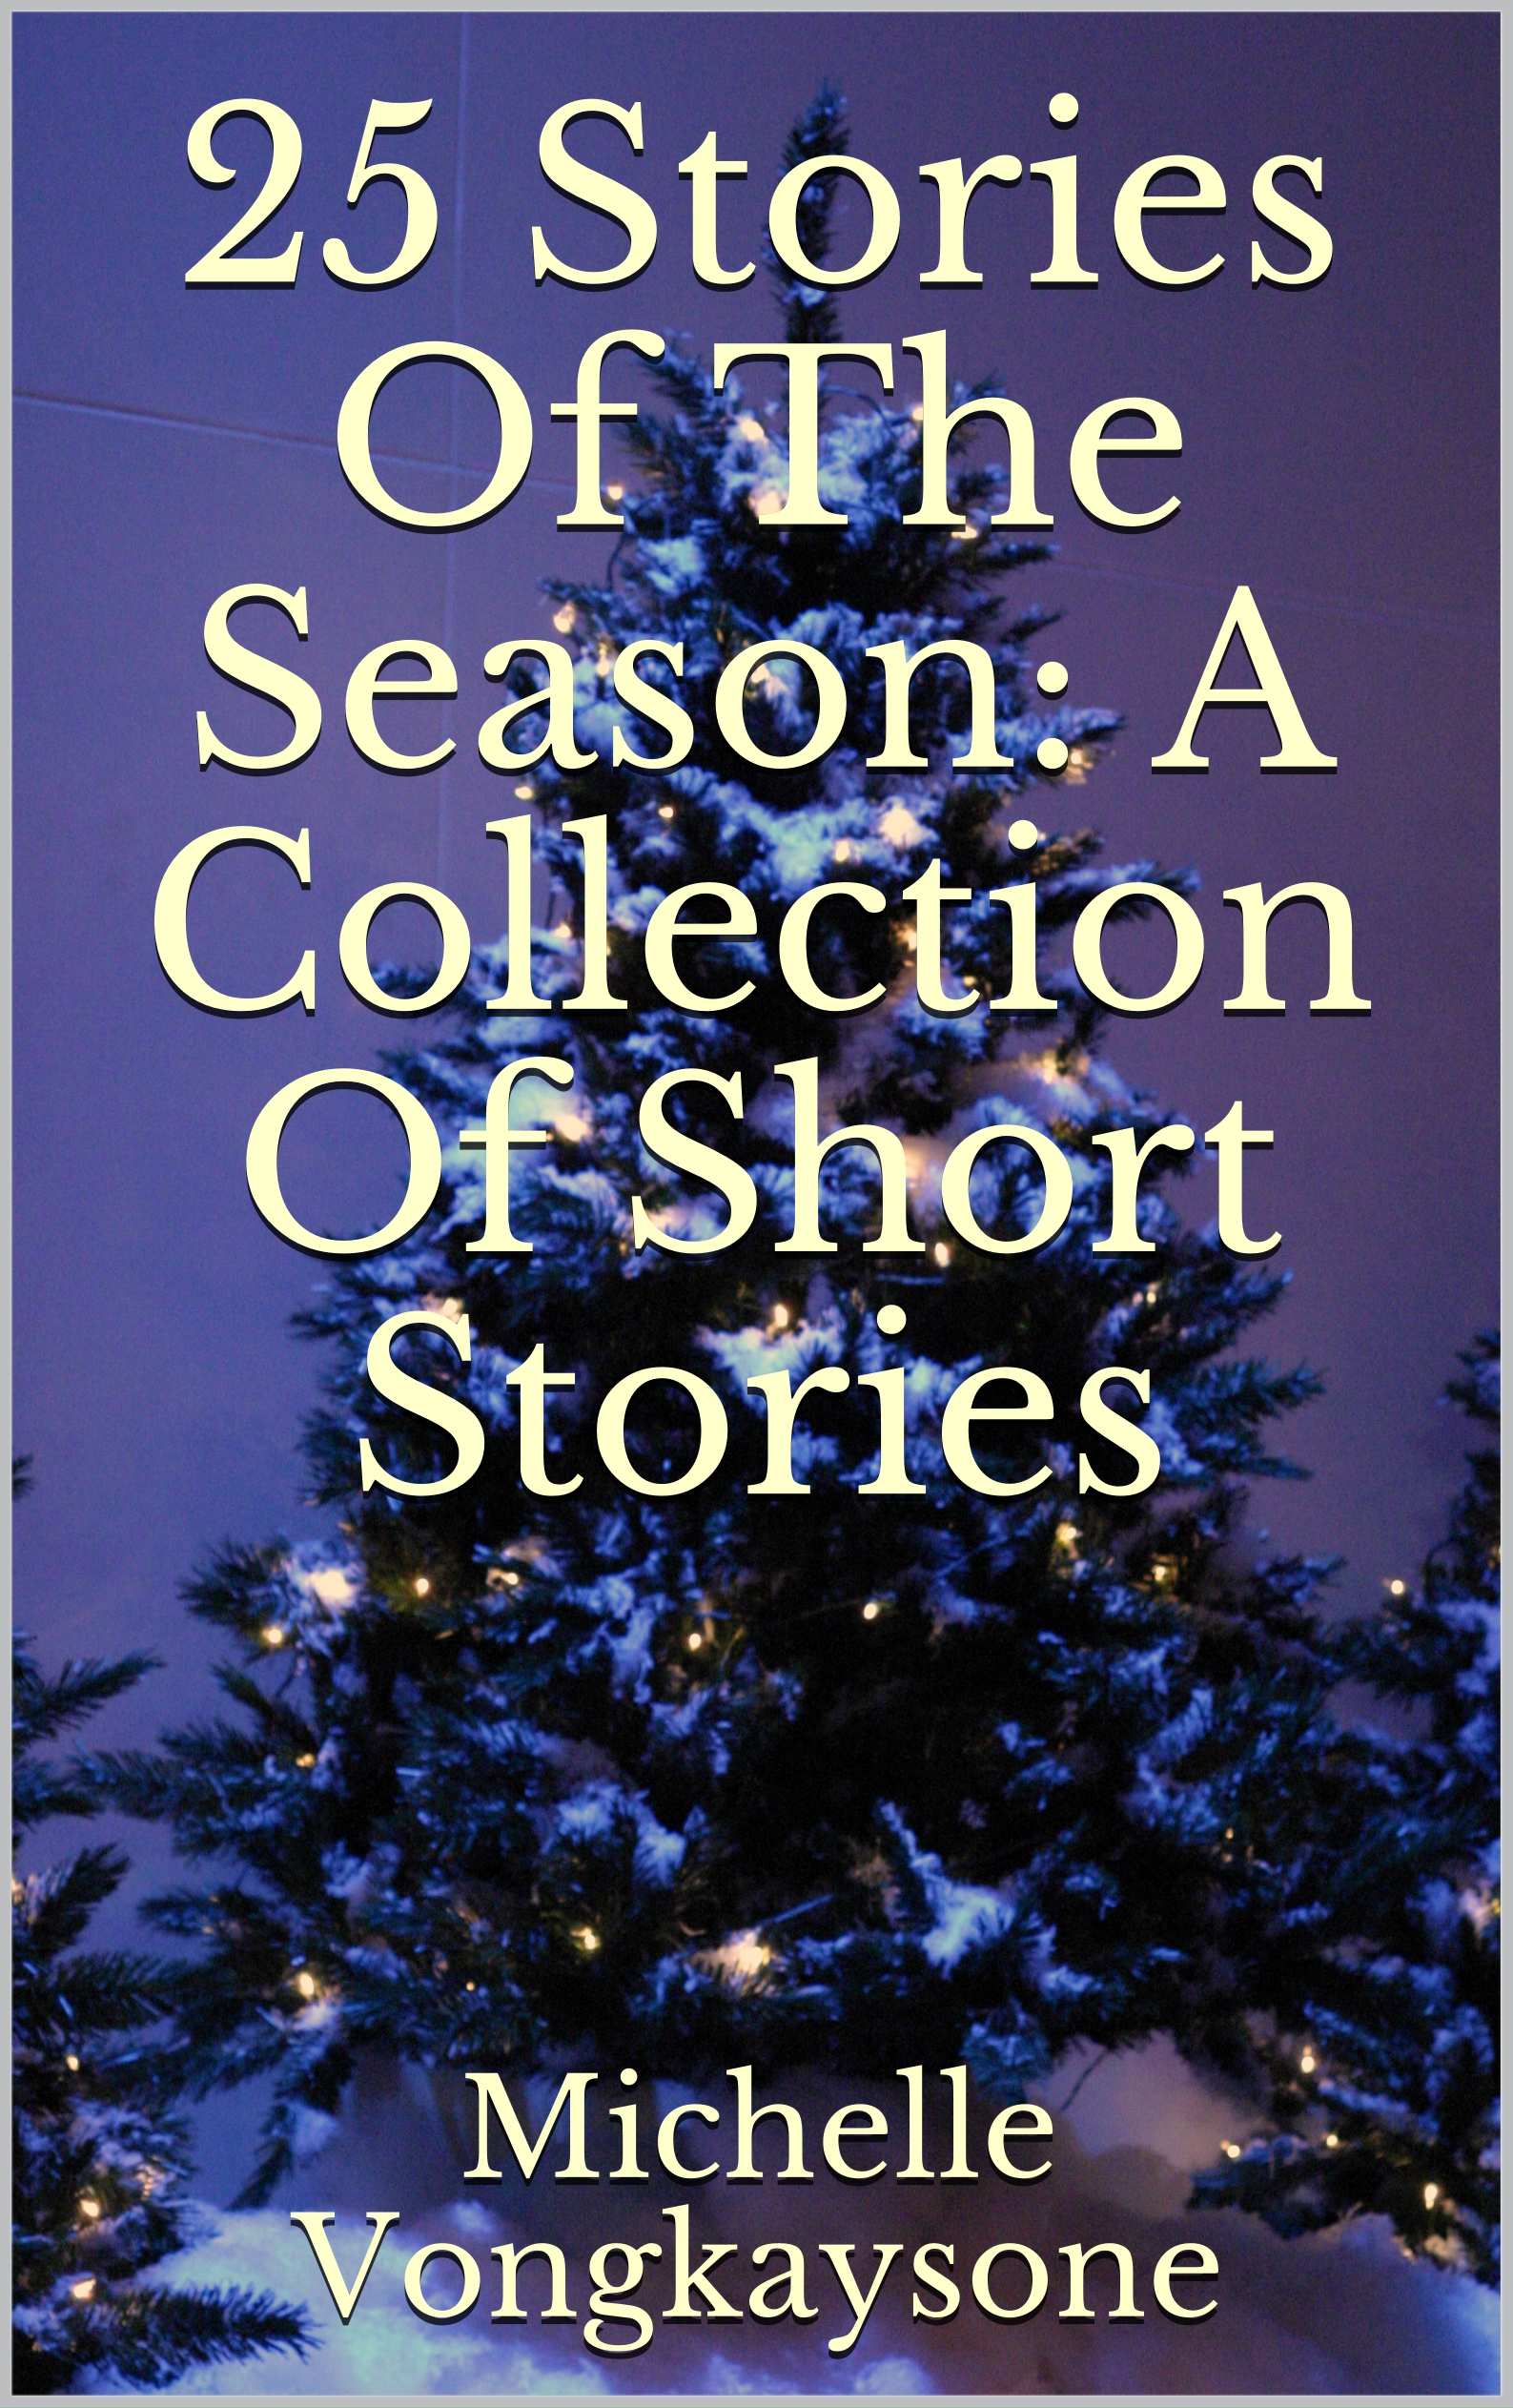 FREE: 25 Stories Of The Season: A Collection Of Short Stories by Michelle Vongkaysone